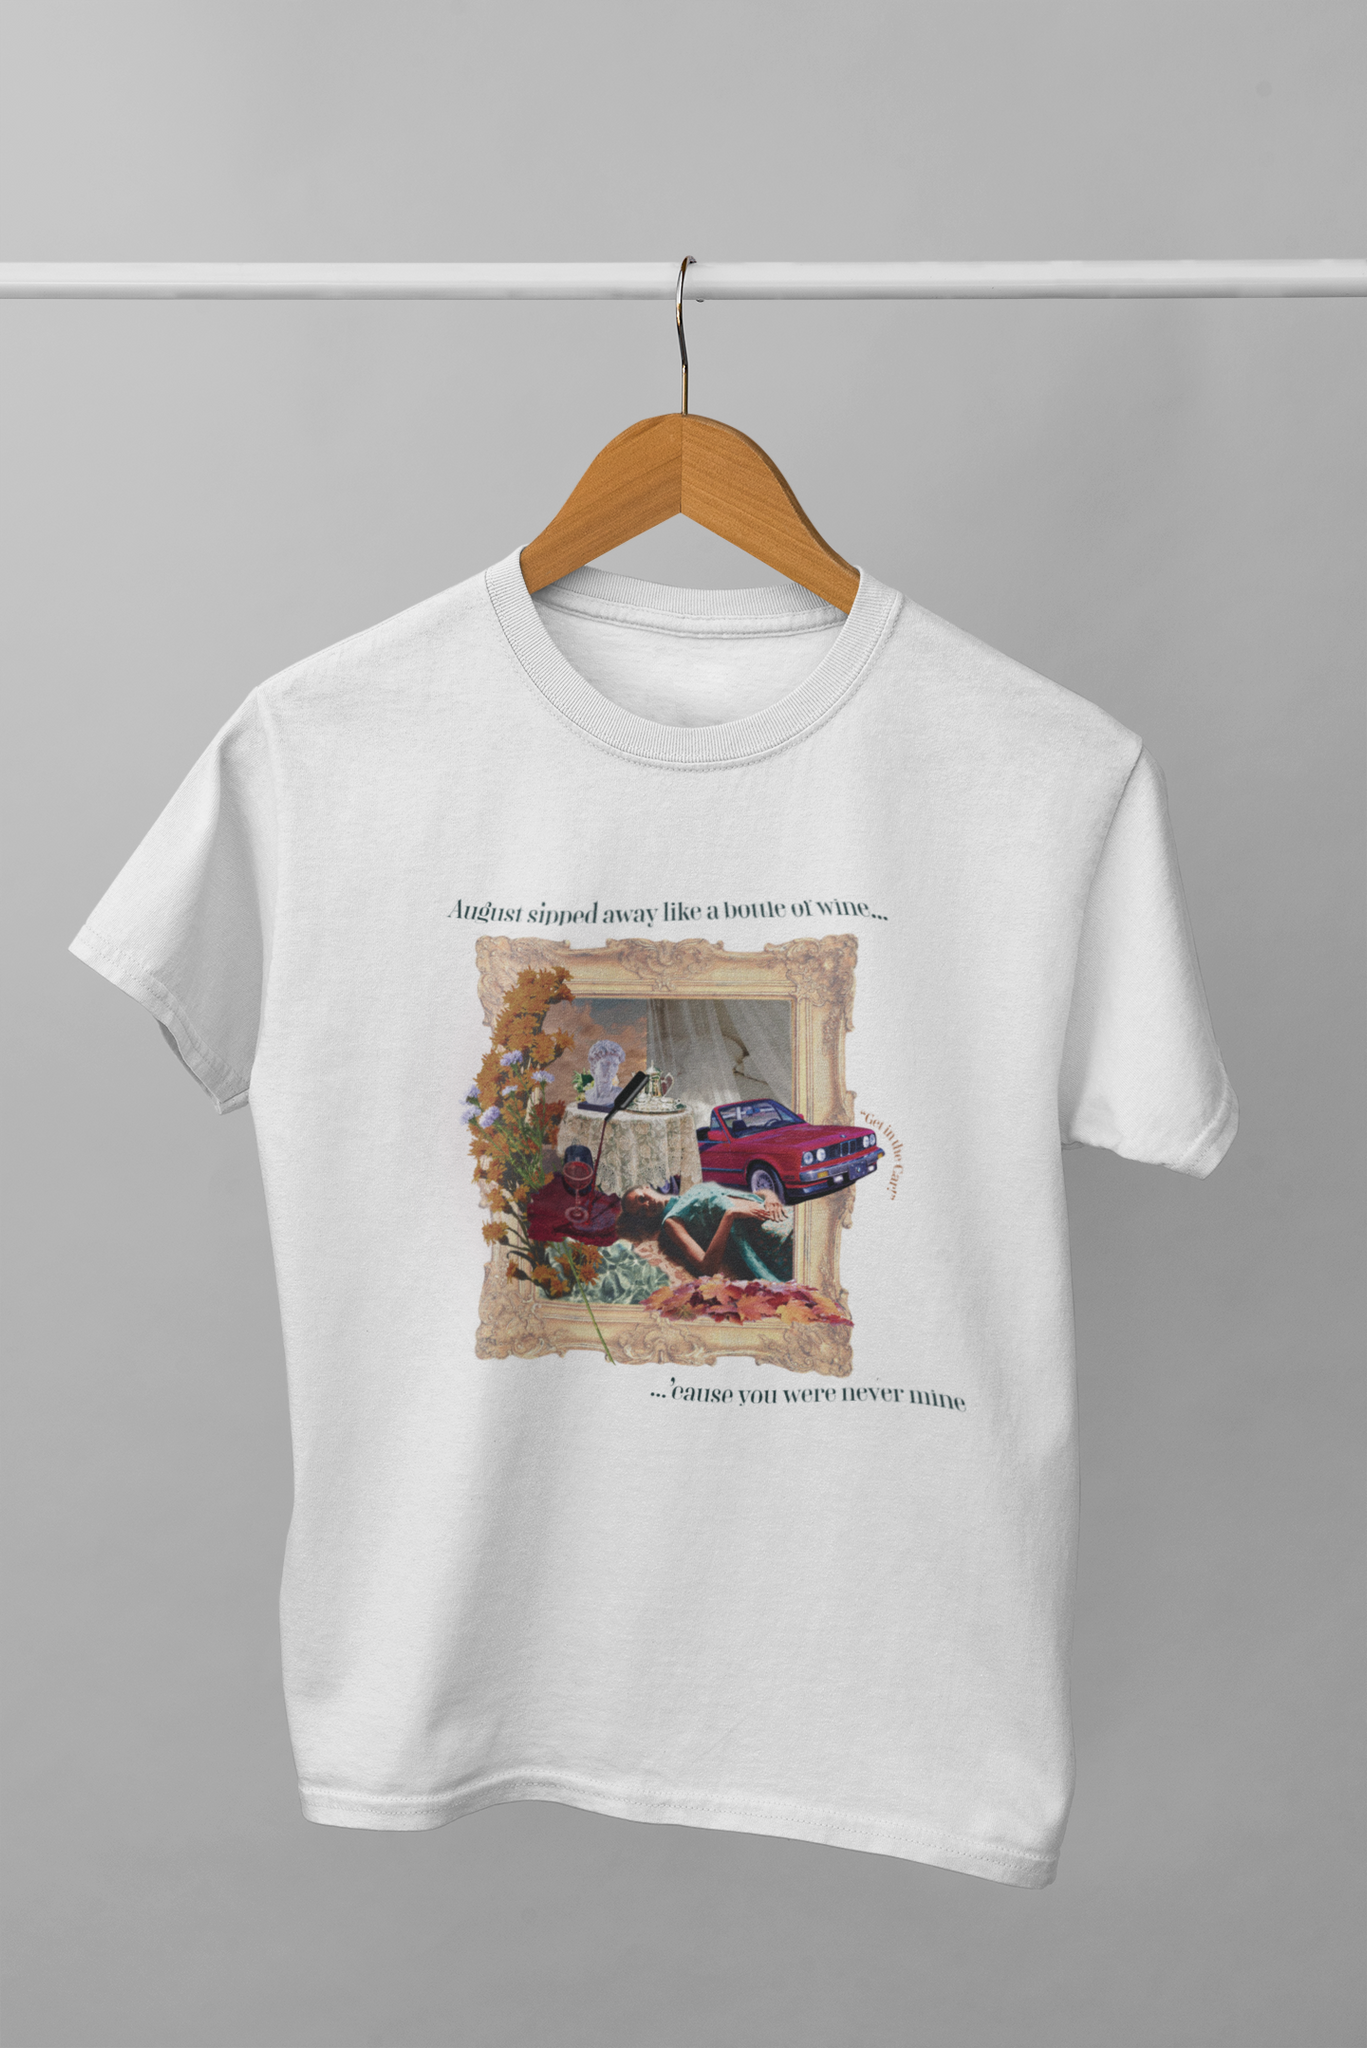 The August Sipped Away T-Shirt